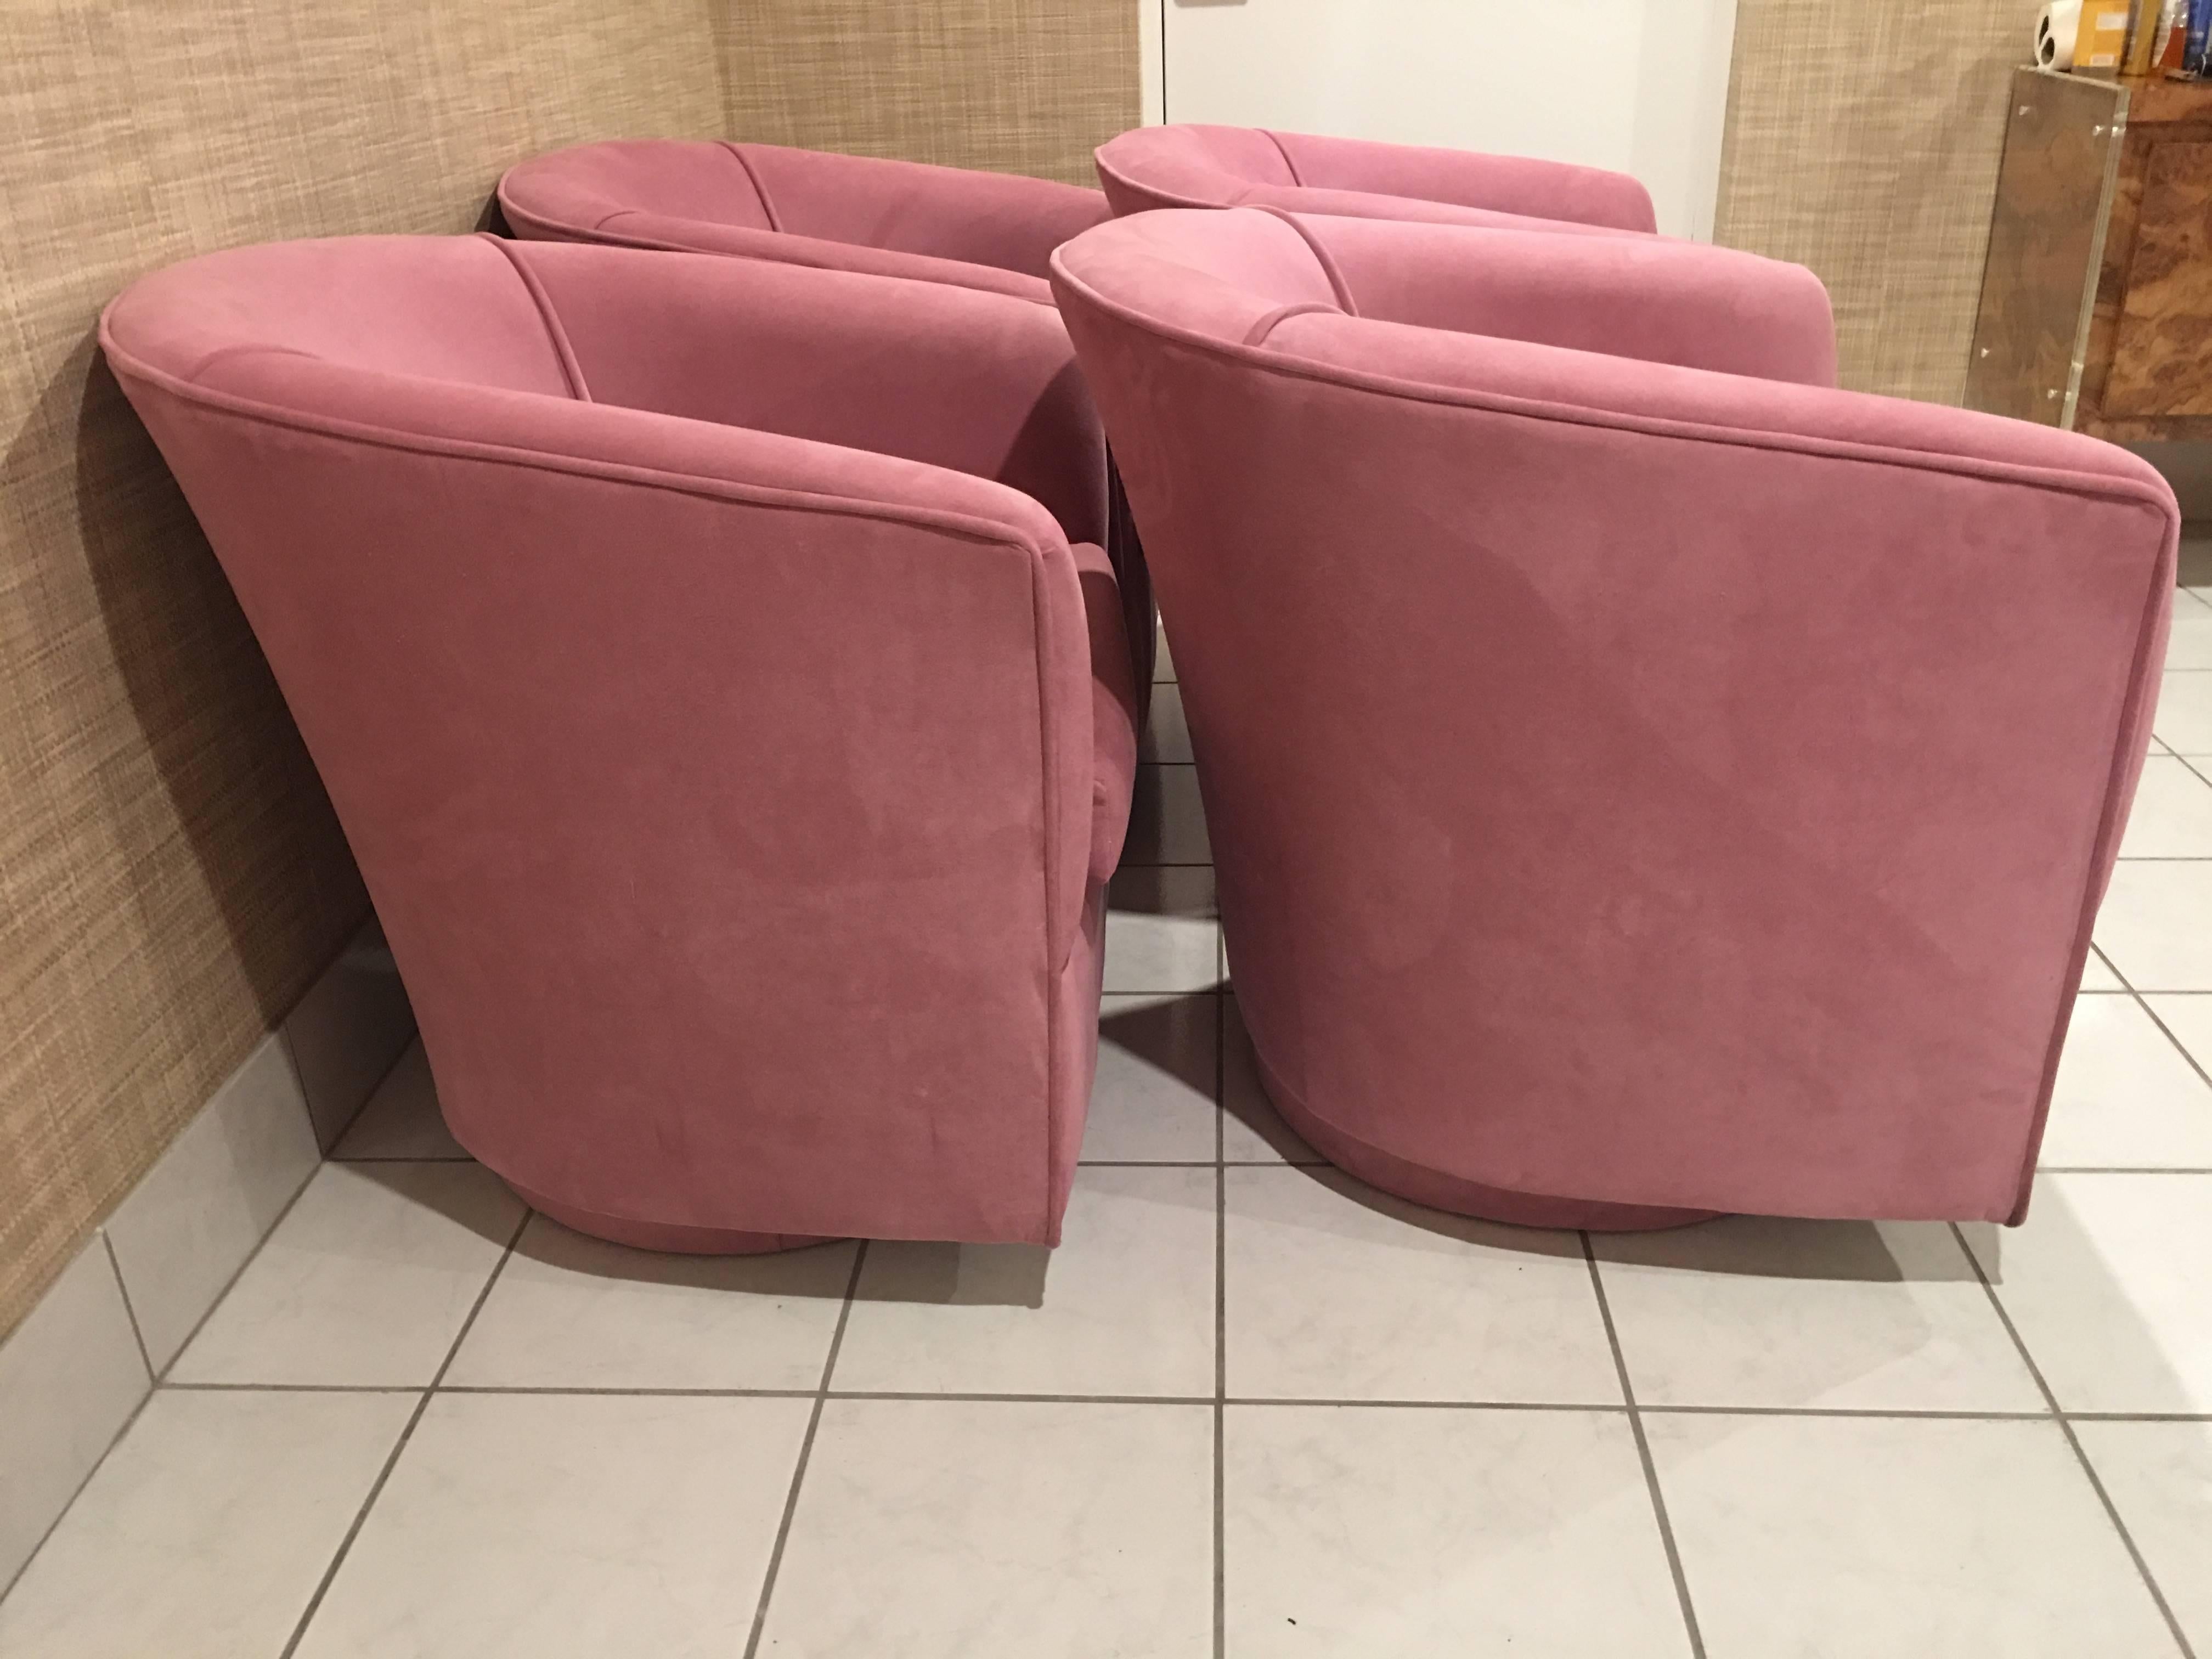 Set of four, vintage swivel armchairs with platform round base. These have there original pink mauve suede upholstery. There are no tips or tears however there might be some light soiling. In the style of Milo Baughman. Depth listed is cushion depth.